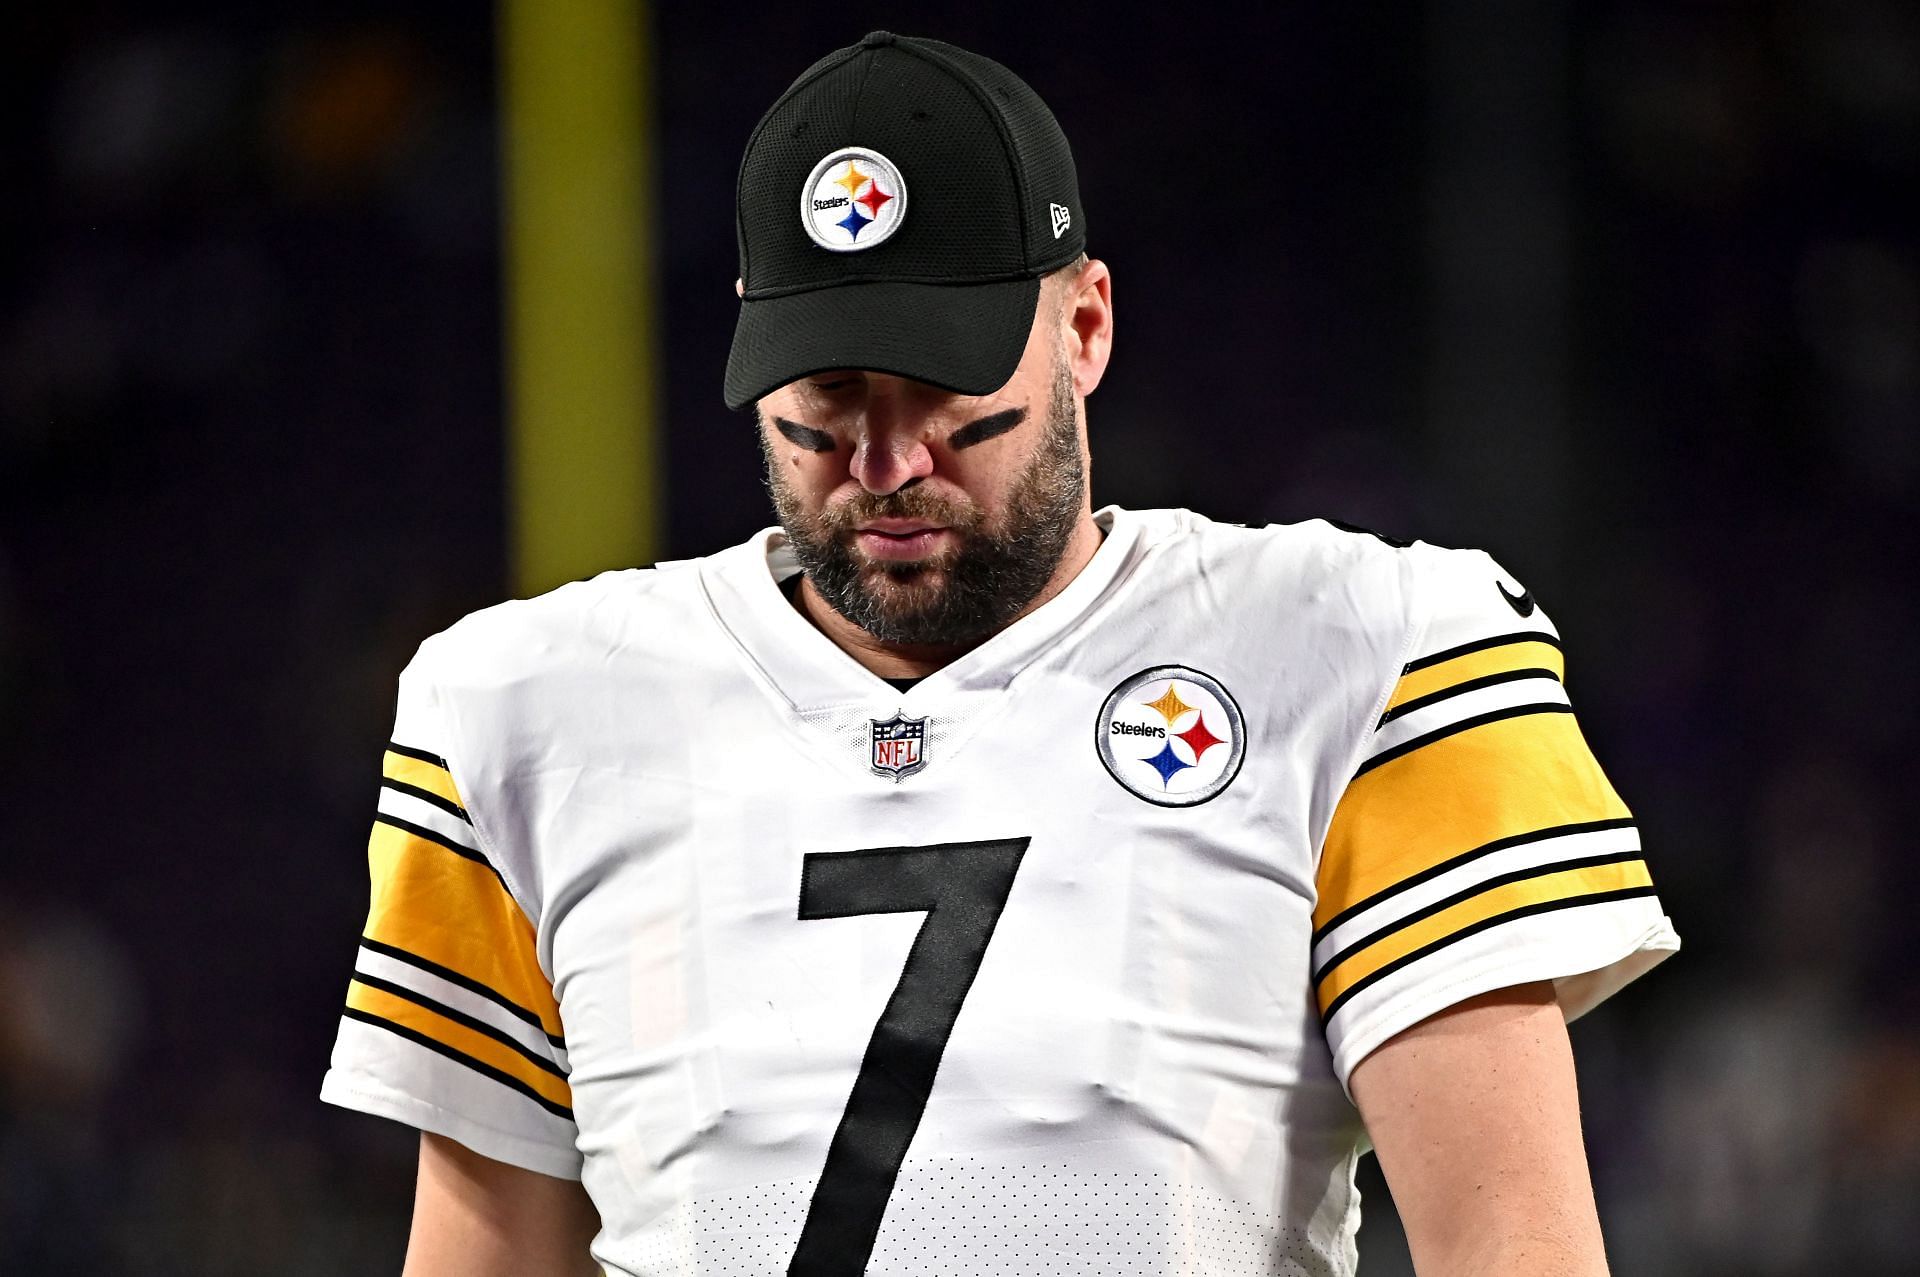 A rare remnant of the 2004 NFL Draft, Ben Roethlisberger&#039;s final snaps lie ahead (Photo: Getty)